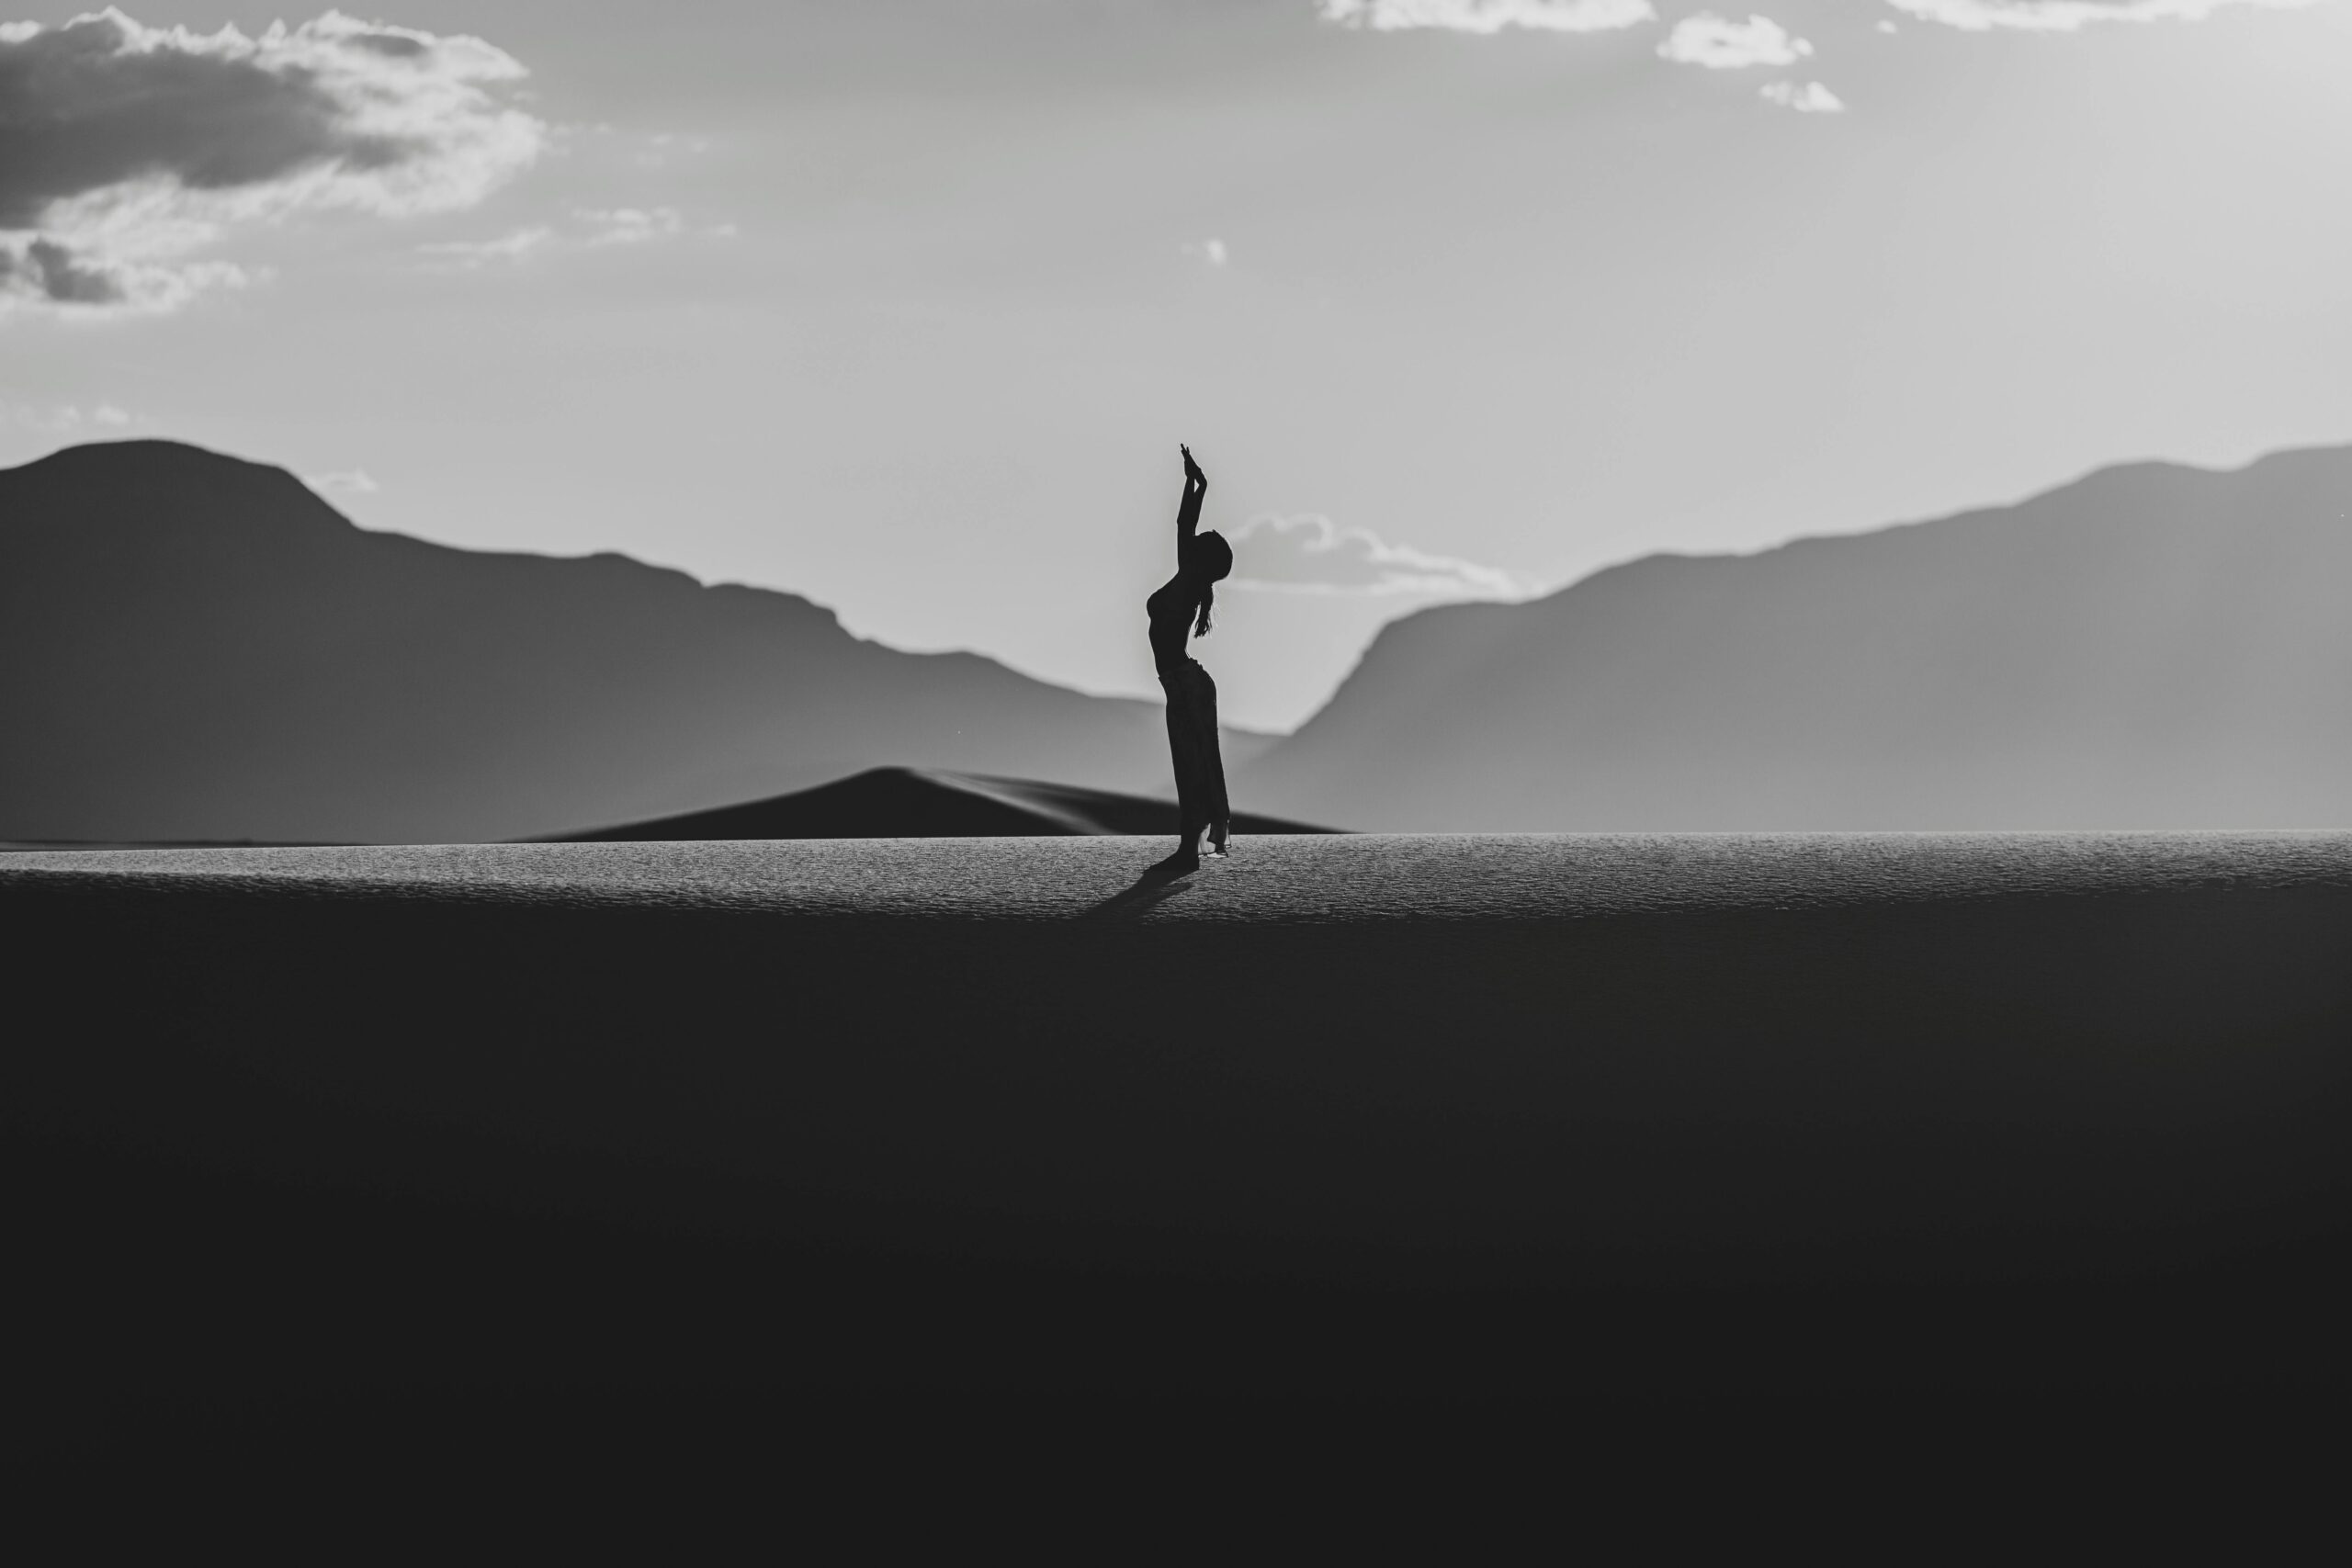 Visionary Resilience: Silhouette of a person standing confidently on a horizon, framed by mountains, embodying the spirit of visionary leadership and future aspirations.